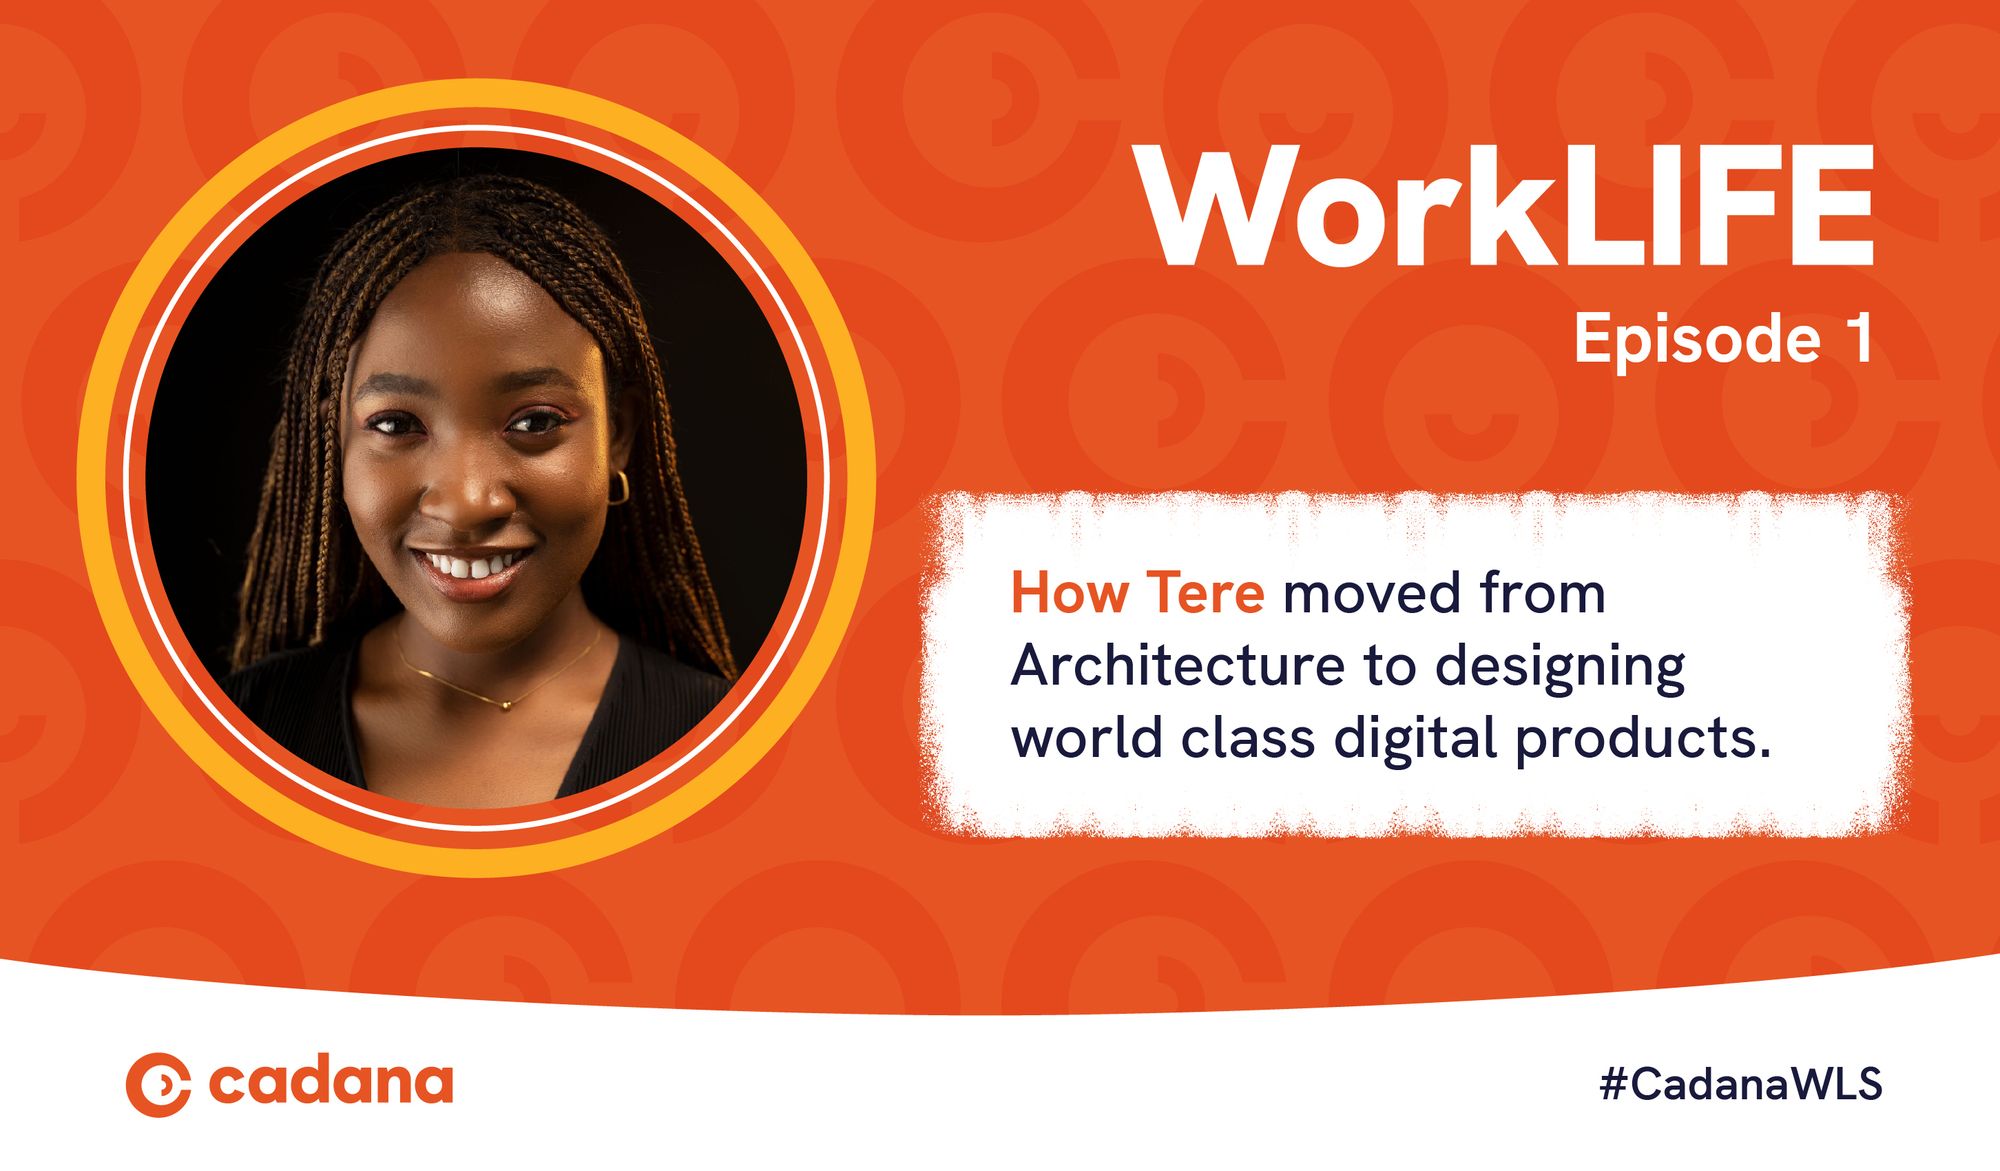 Work Life: How Tere moved from Architecture to designing world class digital products.